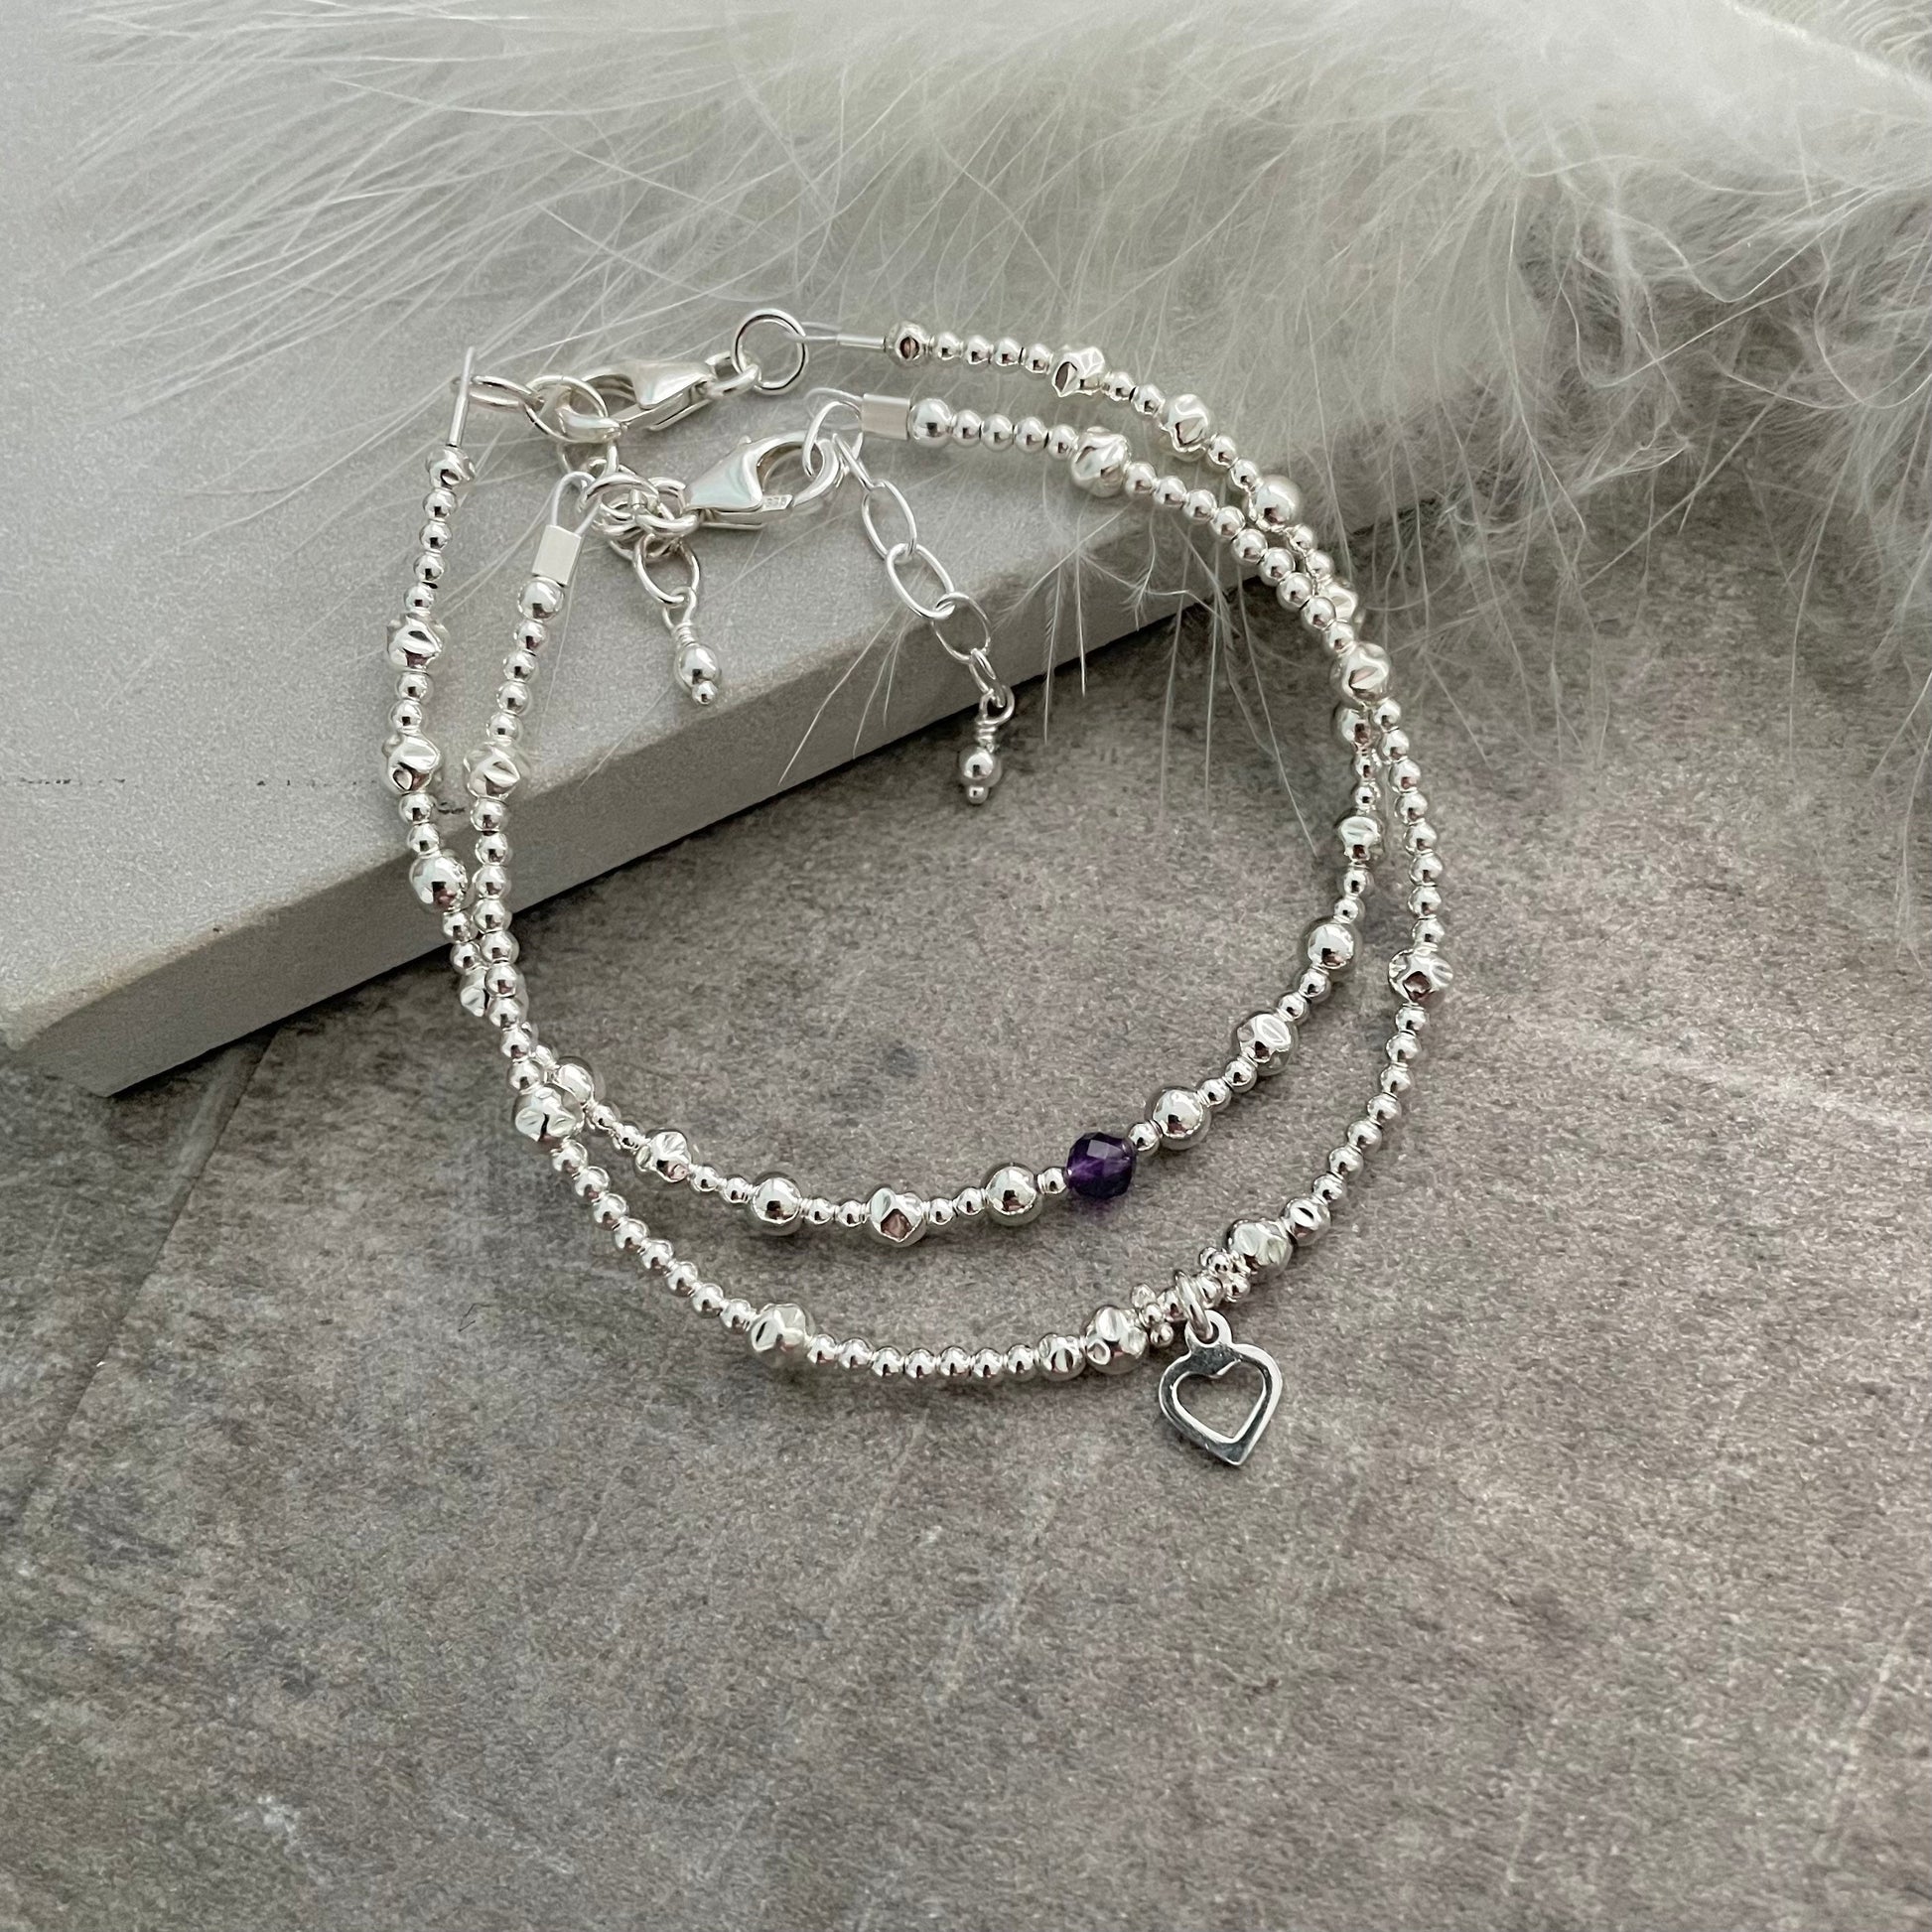 Birthstone Bracelet Set made with Birthstone and Sterling Silver, Birthday Gift for Women